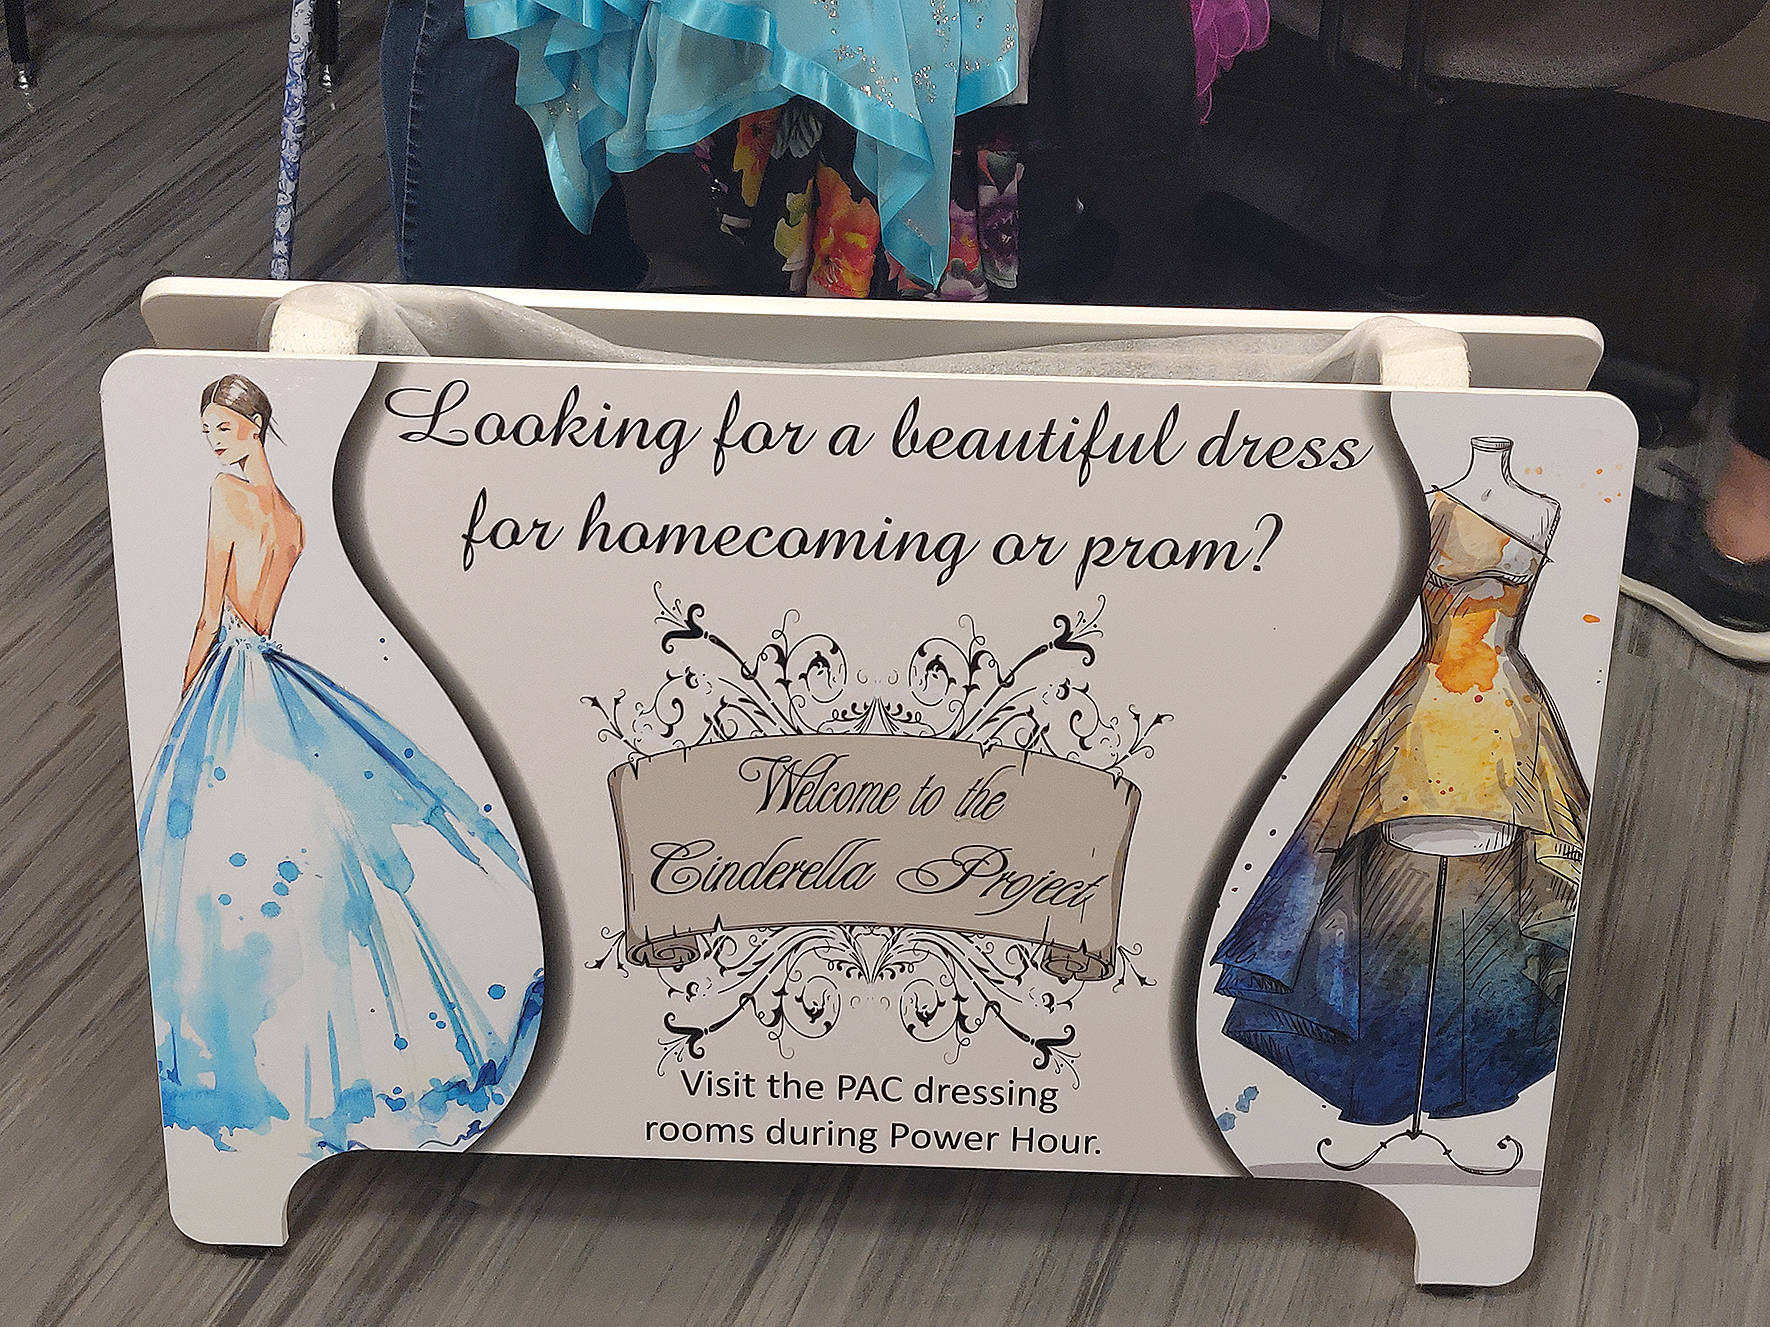 Dresses for a school full of royalty